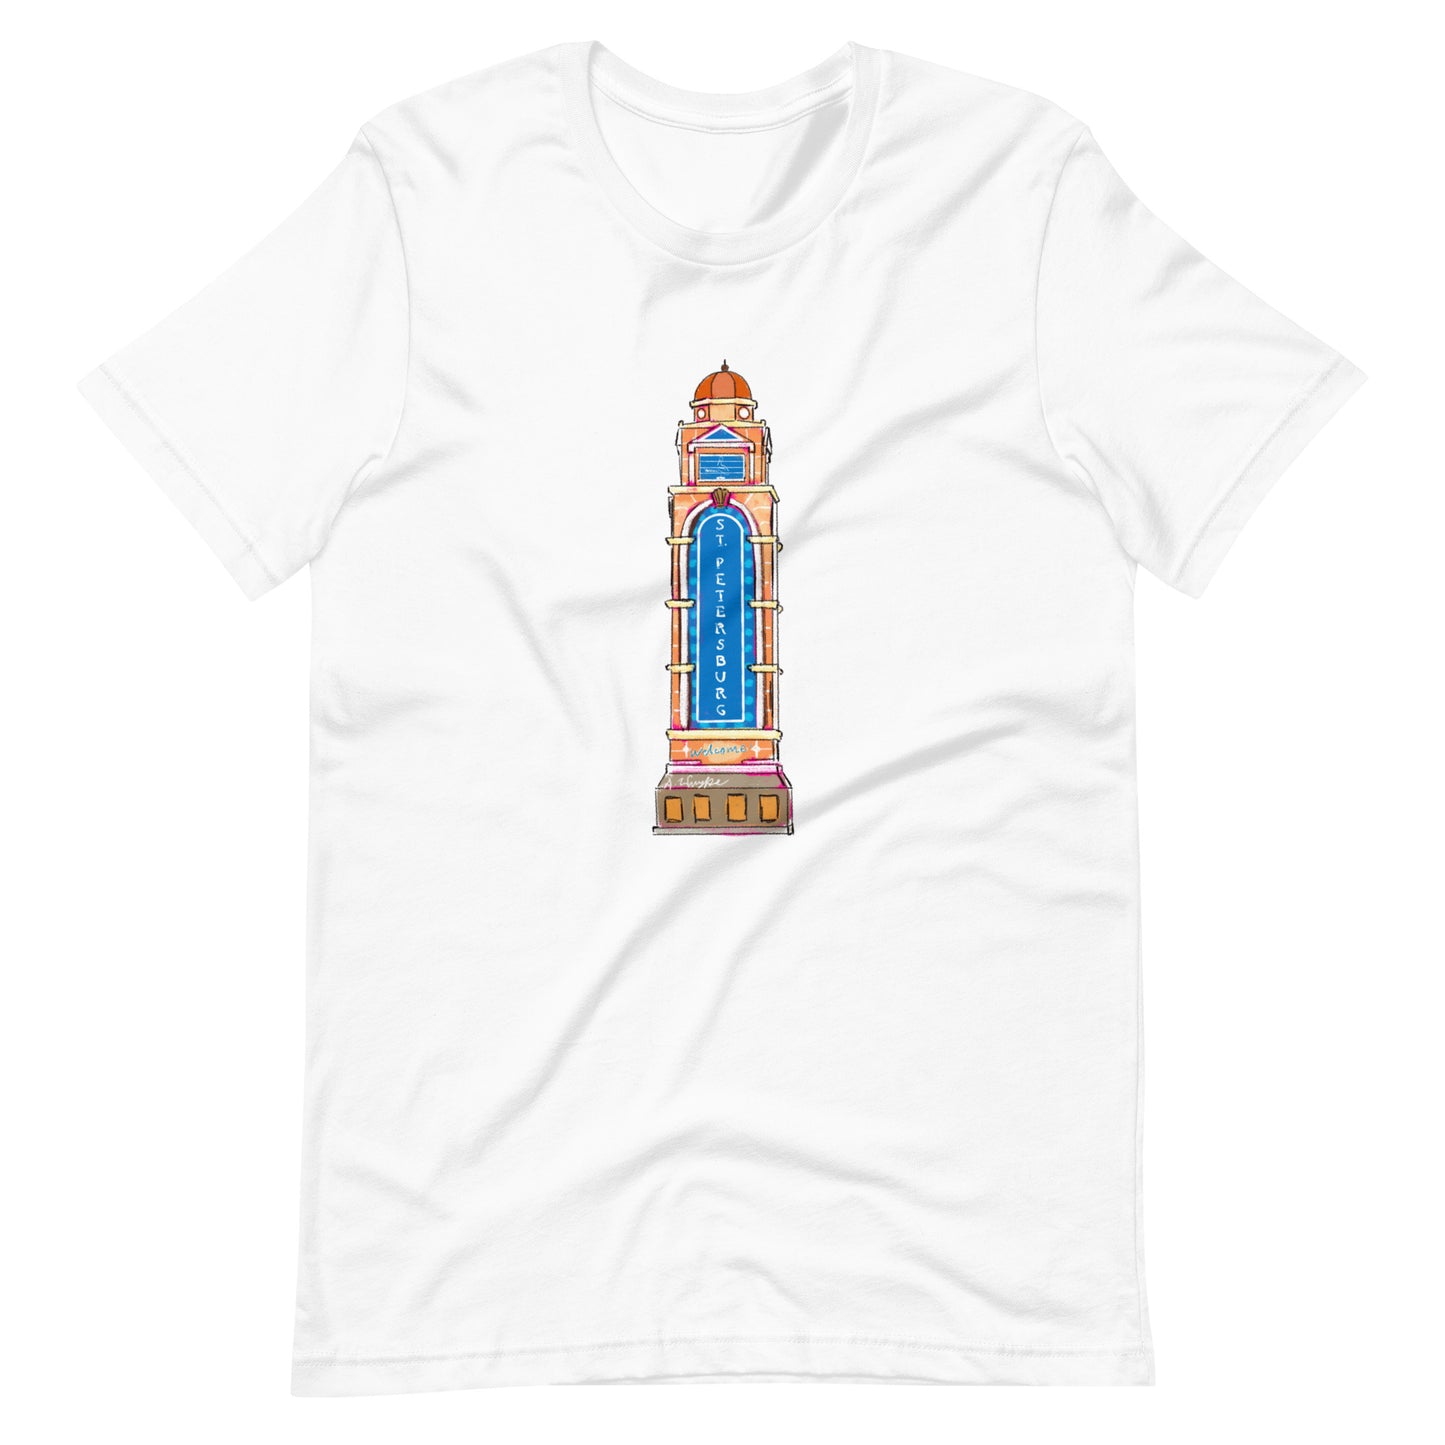 "Welcome to St. Pete" Tee